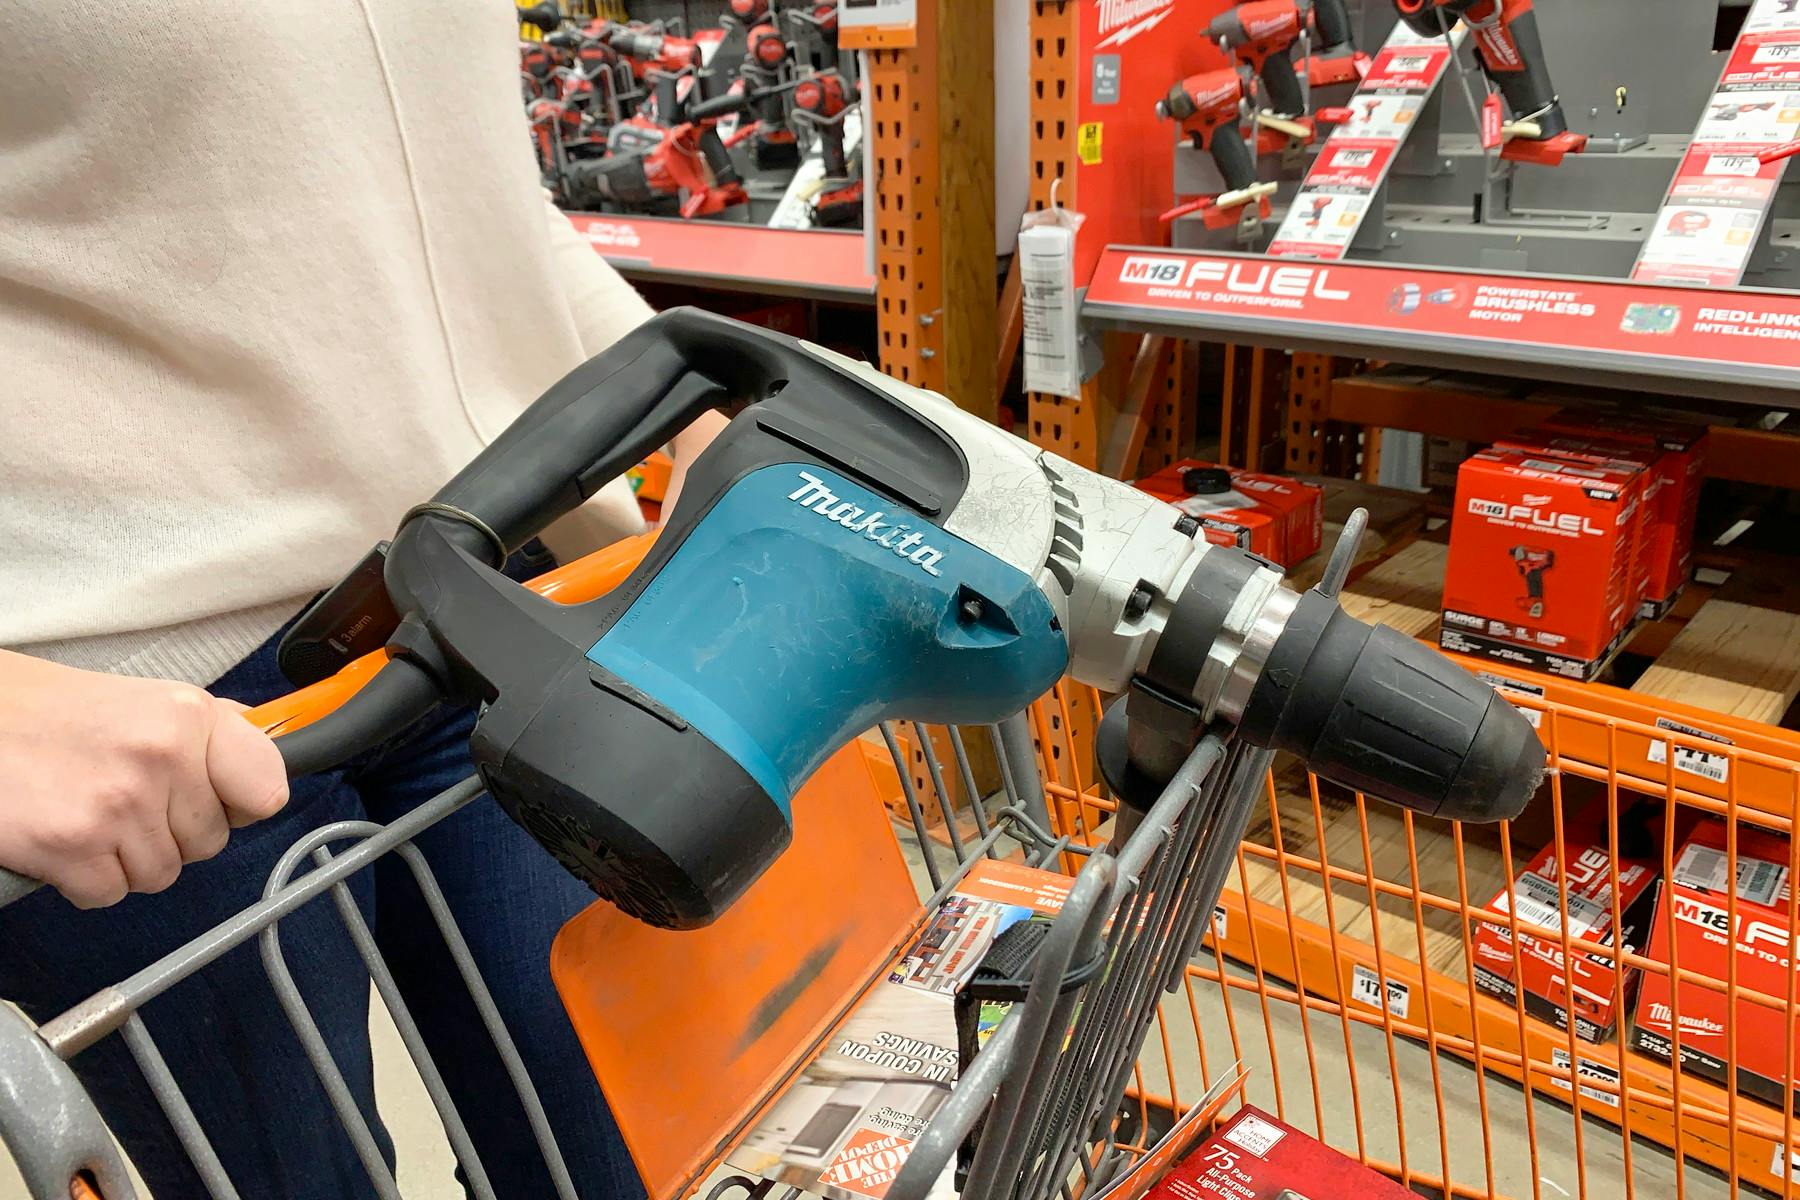 36 Home Depot Hacks You'll Regret Not Knowing - The Krazy Coupon Lady